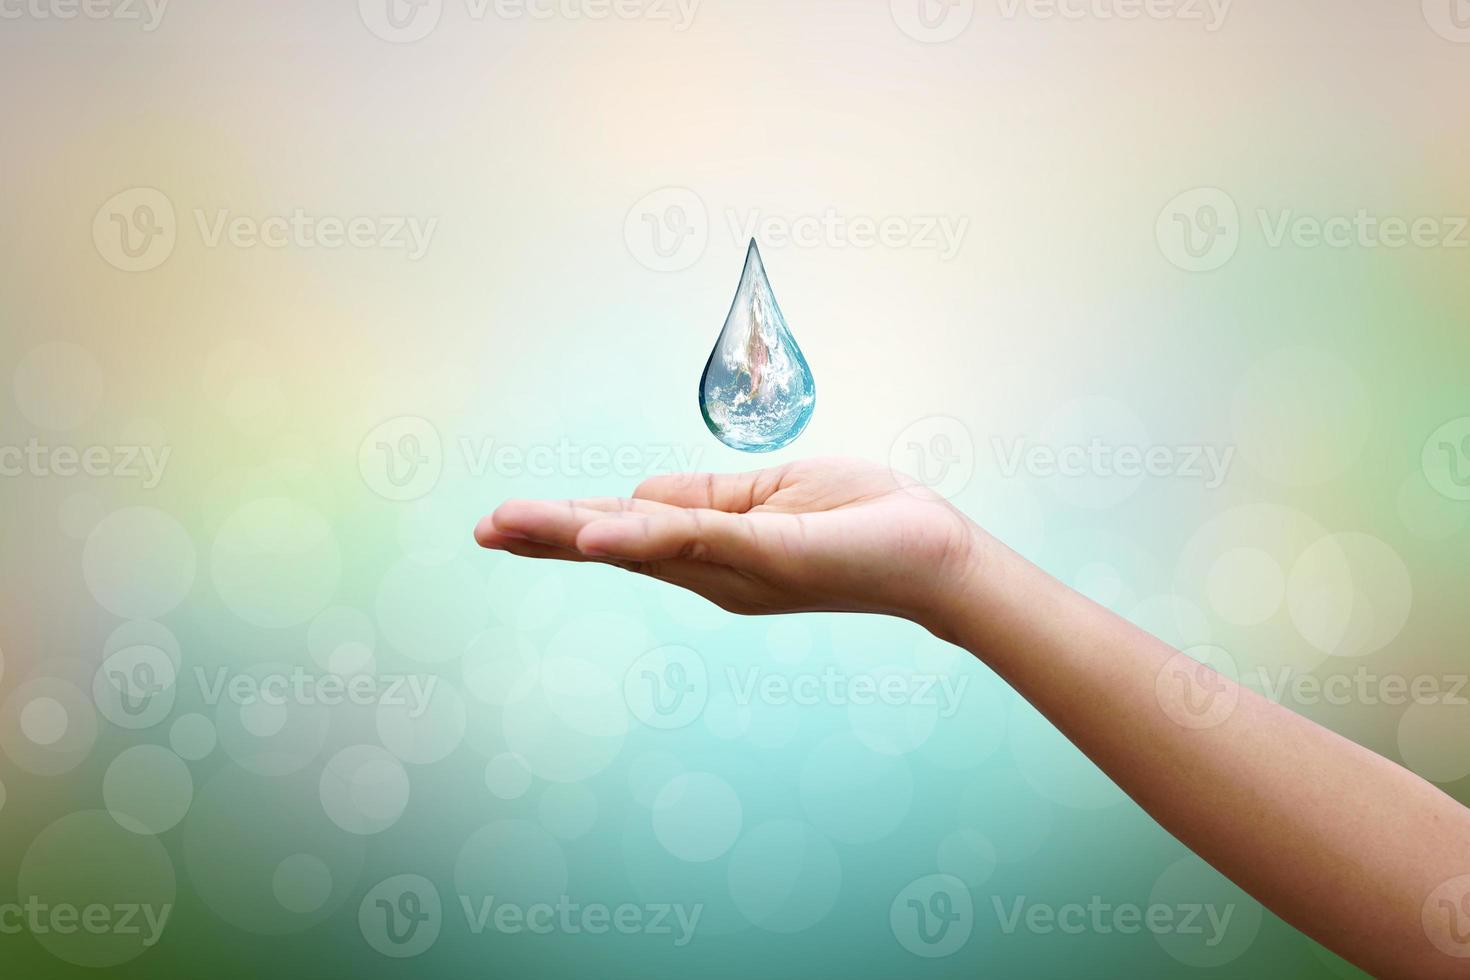 World Water Day Hands waiting for the world in water drop shape on background blurred flowers and sky with the light of the sun. Elements of this image furnished by NASA. photo